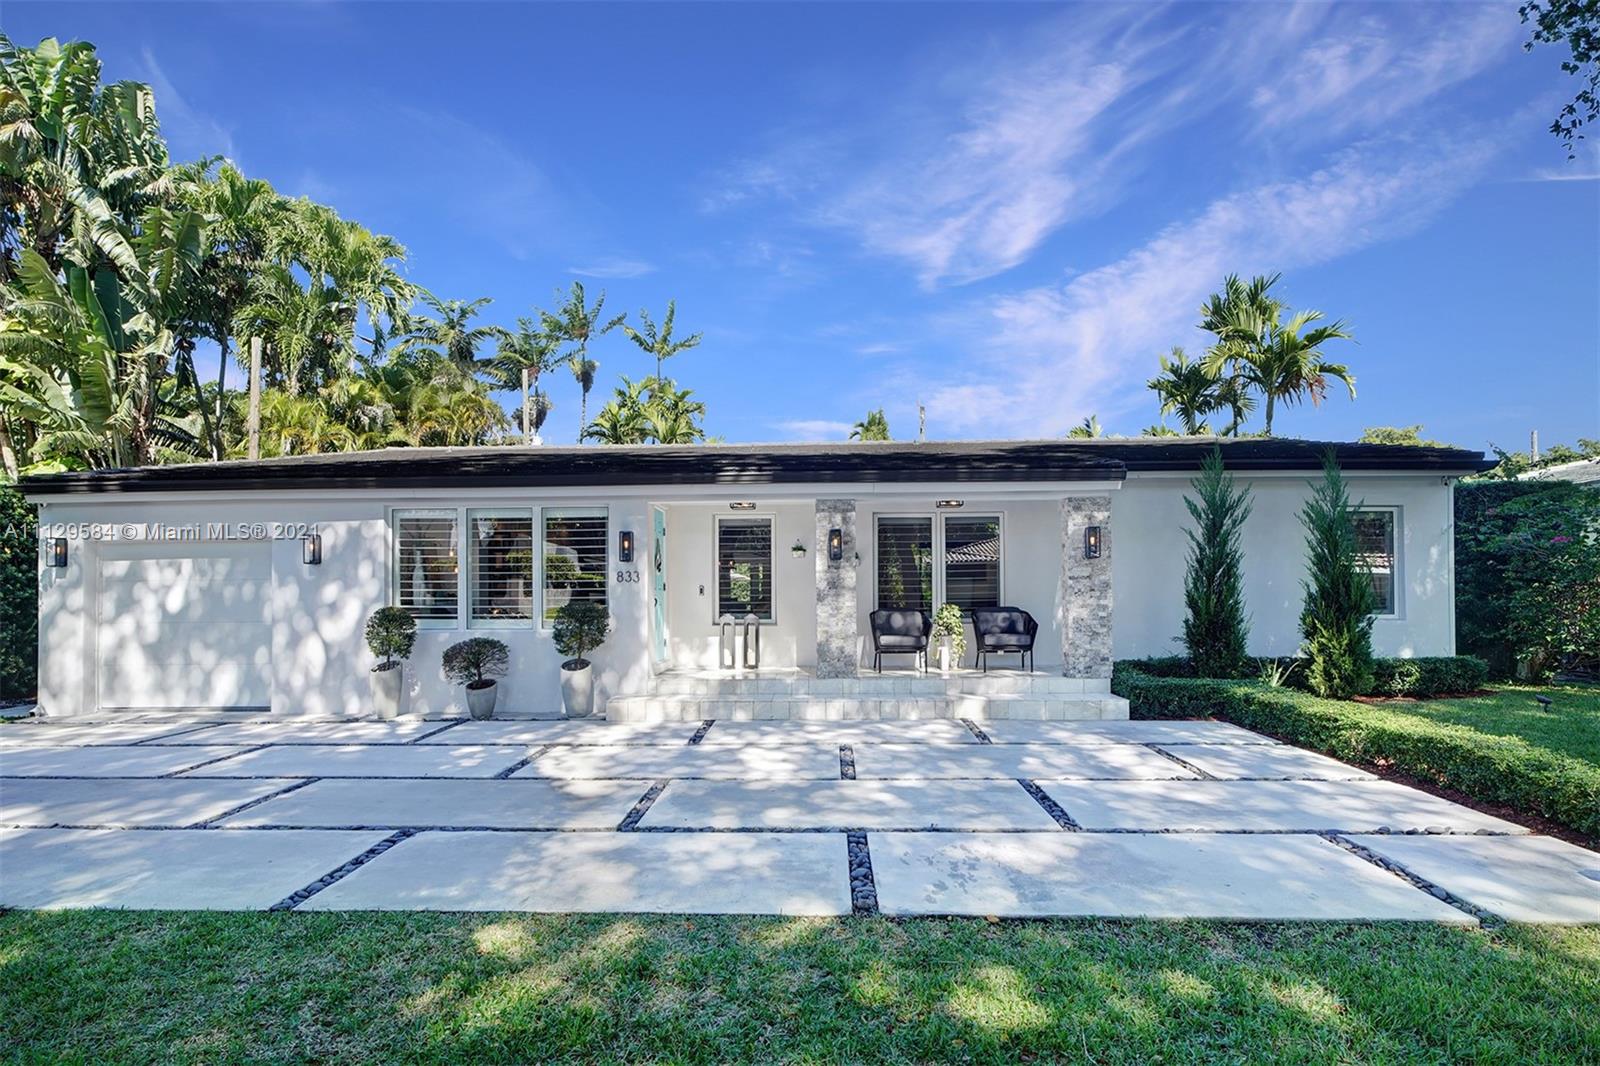 Marvelous Coral Gables house, completely remodeled and updated (2017) with modern and top of the line materials, all windows are impact glass, located in one of the best areas of the Gables just minutes away from Miracle Mile, University of Miami, Biltmore Hotel and the Golf course! 4 bedrooms and 3 full baths plus office space, large living area, stunning kitchen with Italian cabinetry, large eat-in countertop and European appliances. Amazing fixtures around the house including Italian doors, beautiful freestanding tub and much more! Very spacious patio with covered area and room for pool, great for parties and get togethers. In addition, the house has a Tesla charging station and outdoor security system. You will definitely fall in love with this wonderful house!